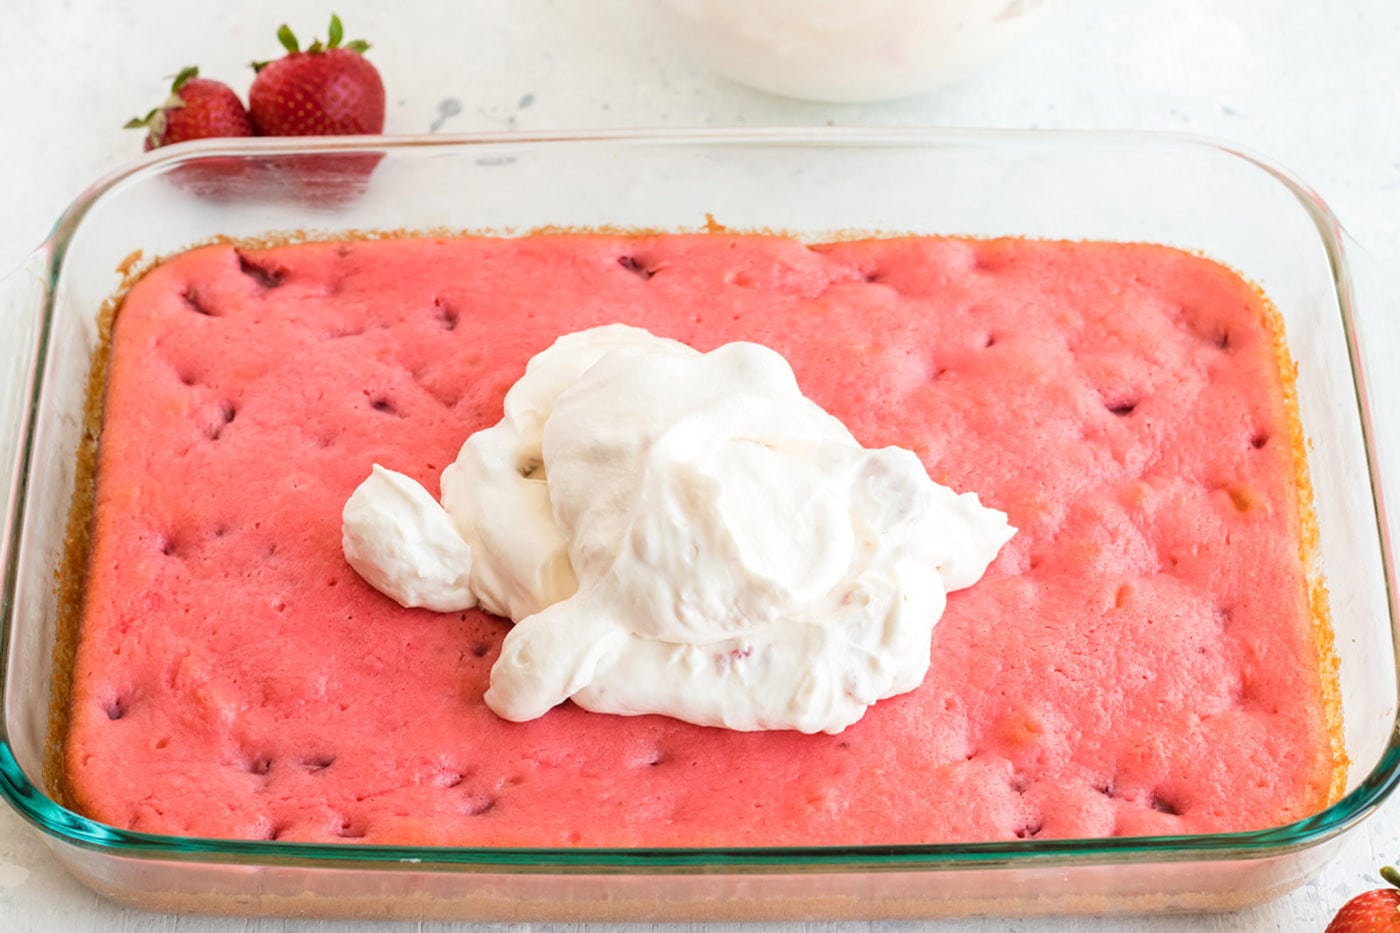 Frosting being spread on top of strawberry cake